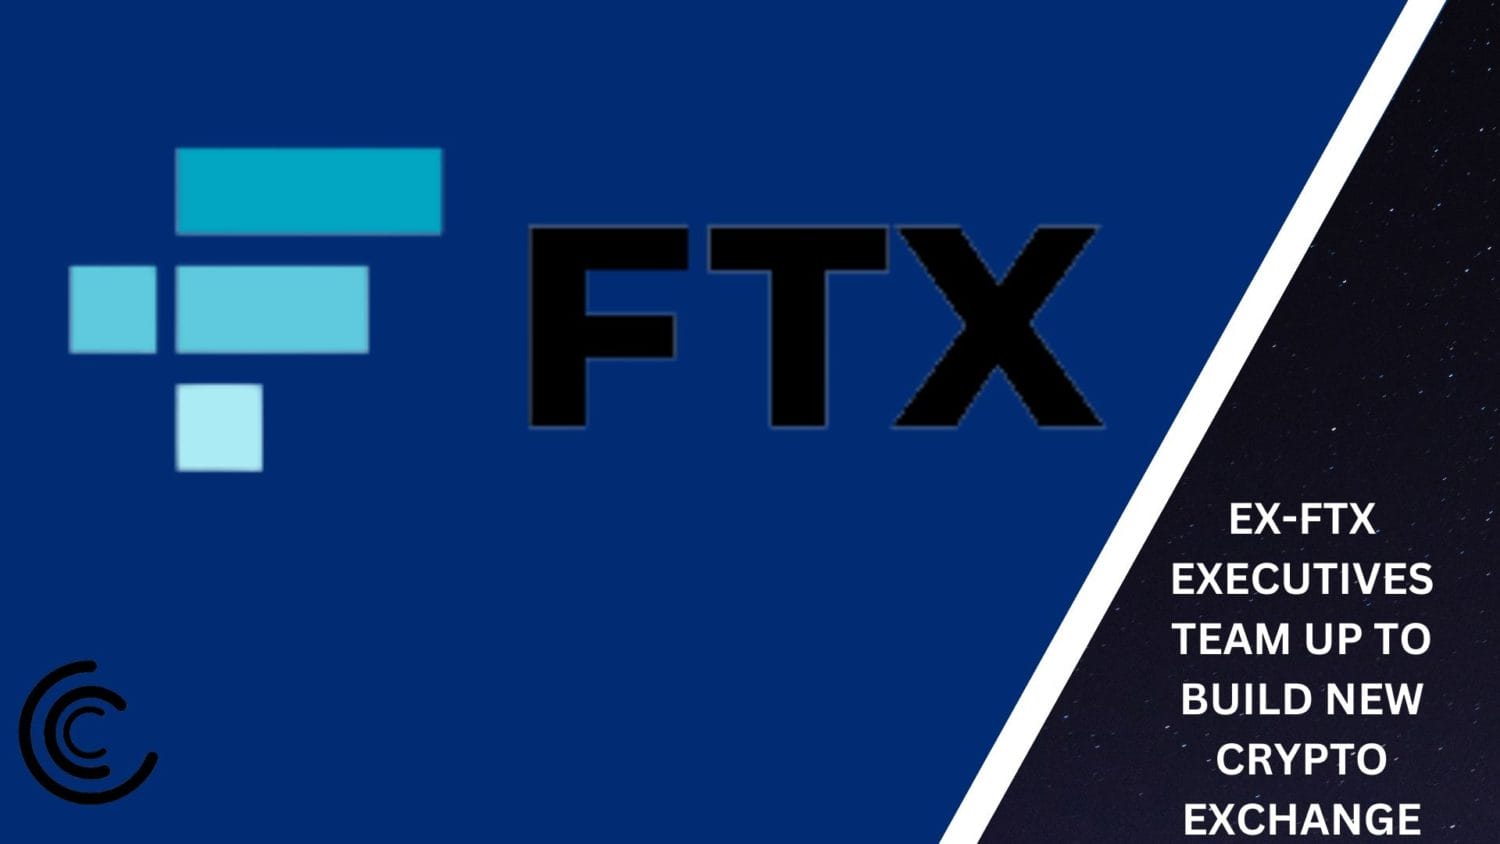 Ex-Ftx Executives Team Up To Build New Crypto Exchange